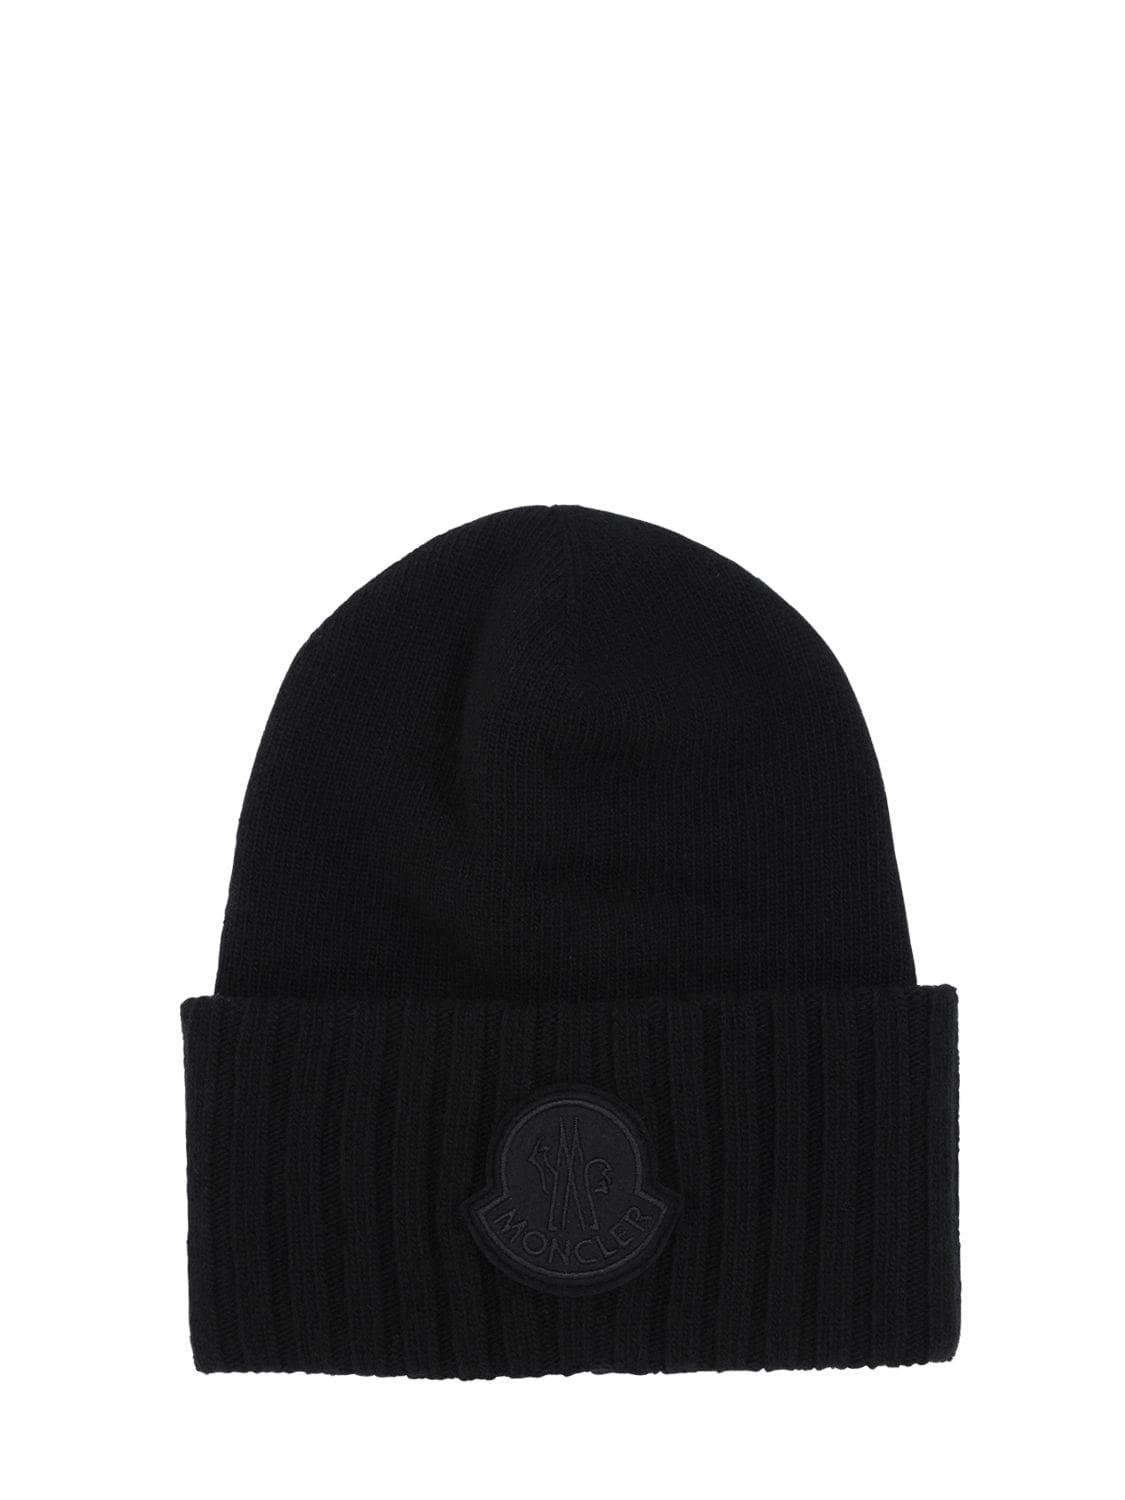 Moncler Logo Wool Tricot Knit Hat in Black - Lyst